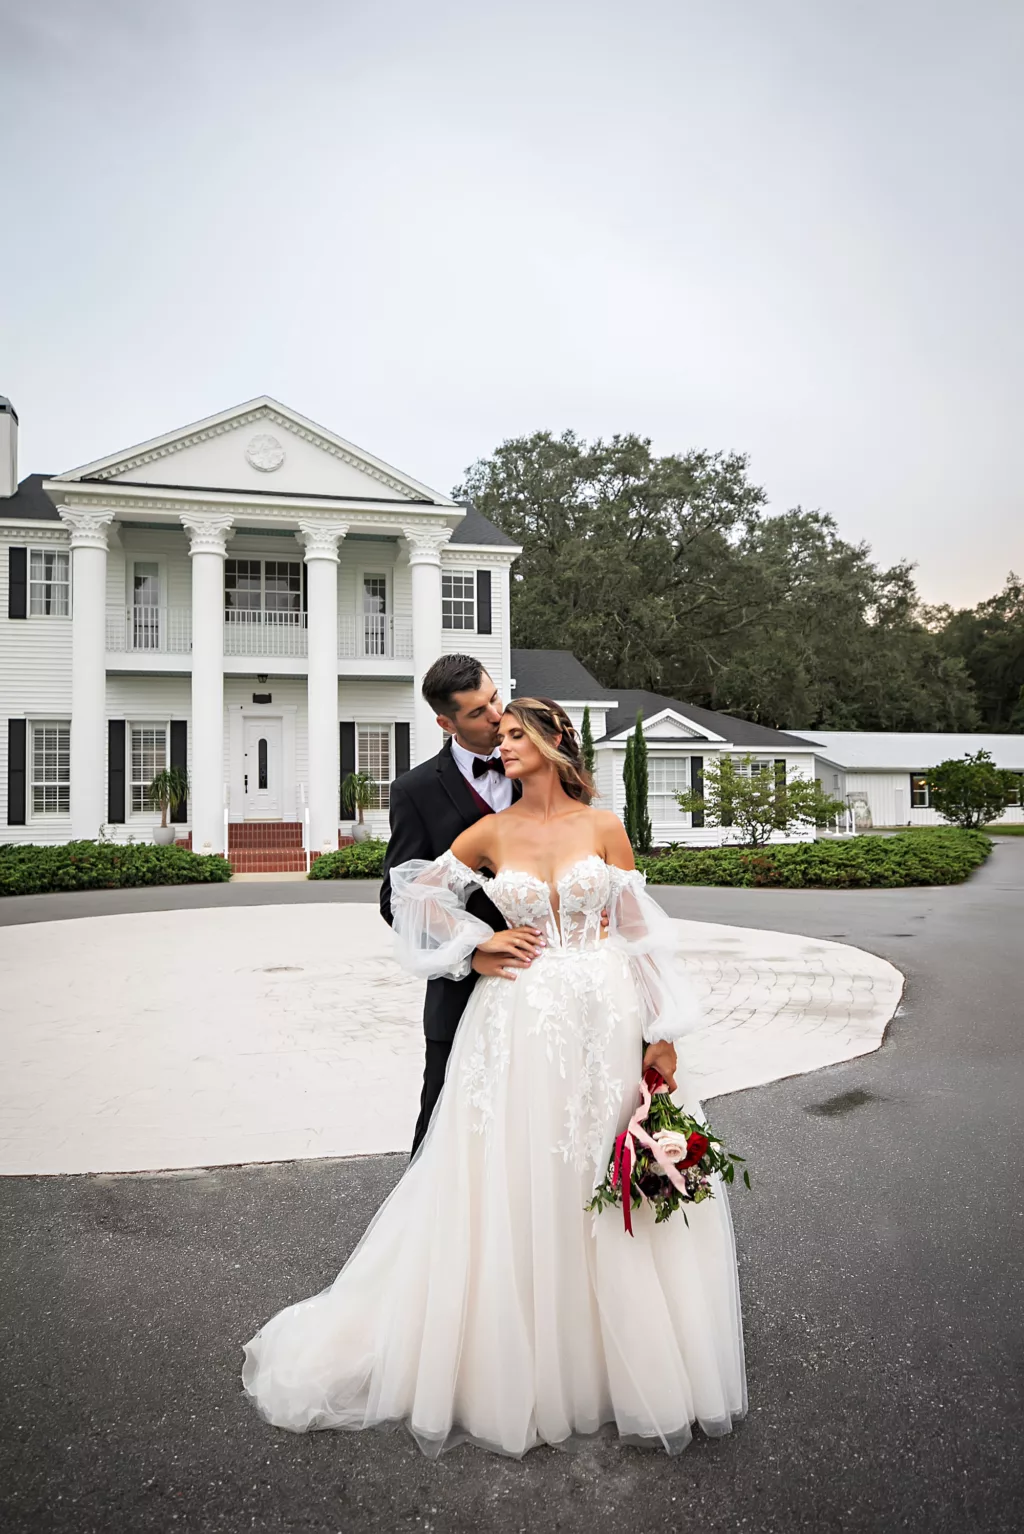 White Tulle A-Line Wedding Dress with Off The Shoulder Puff Sleeves | Tampa Bay Event Venue Legacy Lane Weddings | Photographer Limelight Photography | Videographer Priceless Studio Design